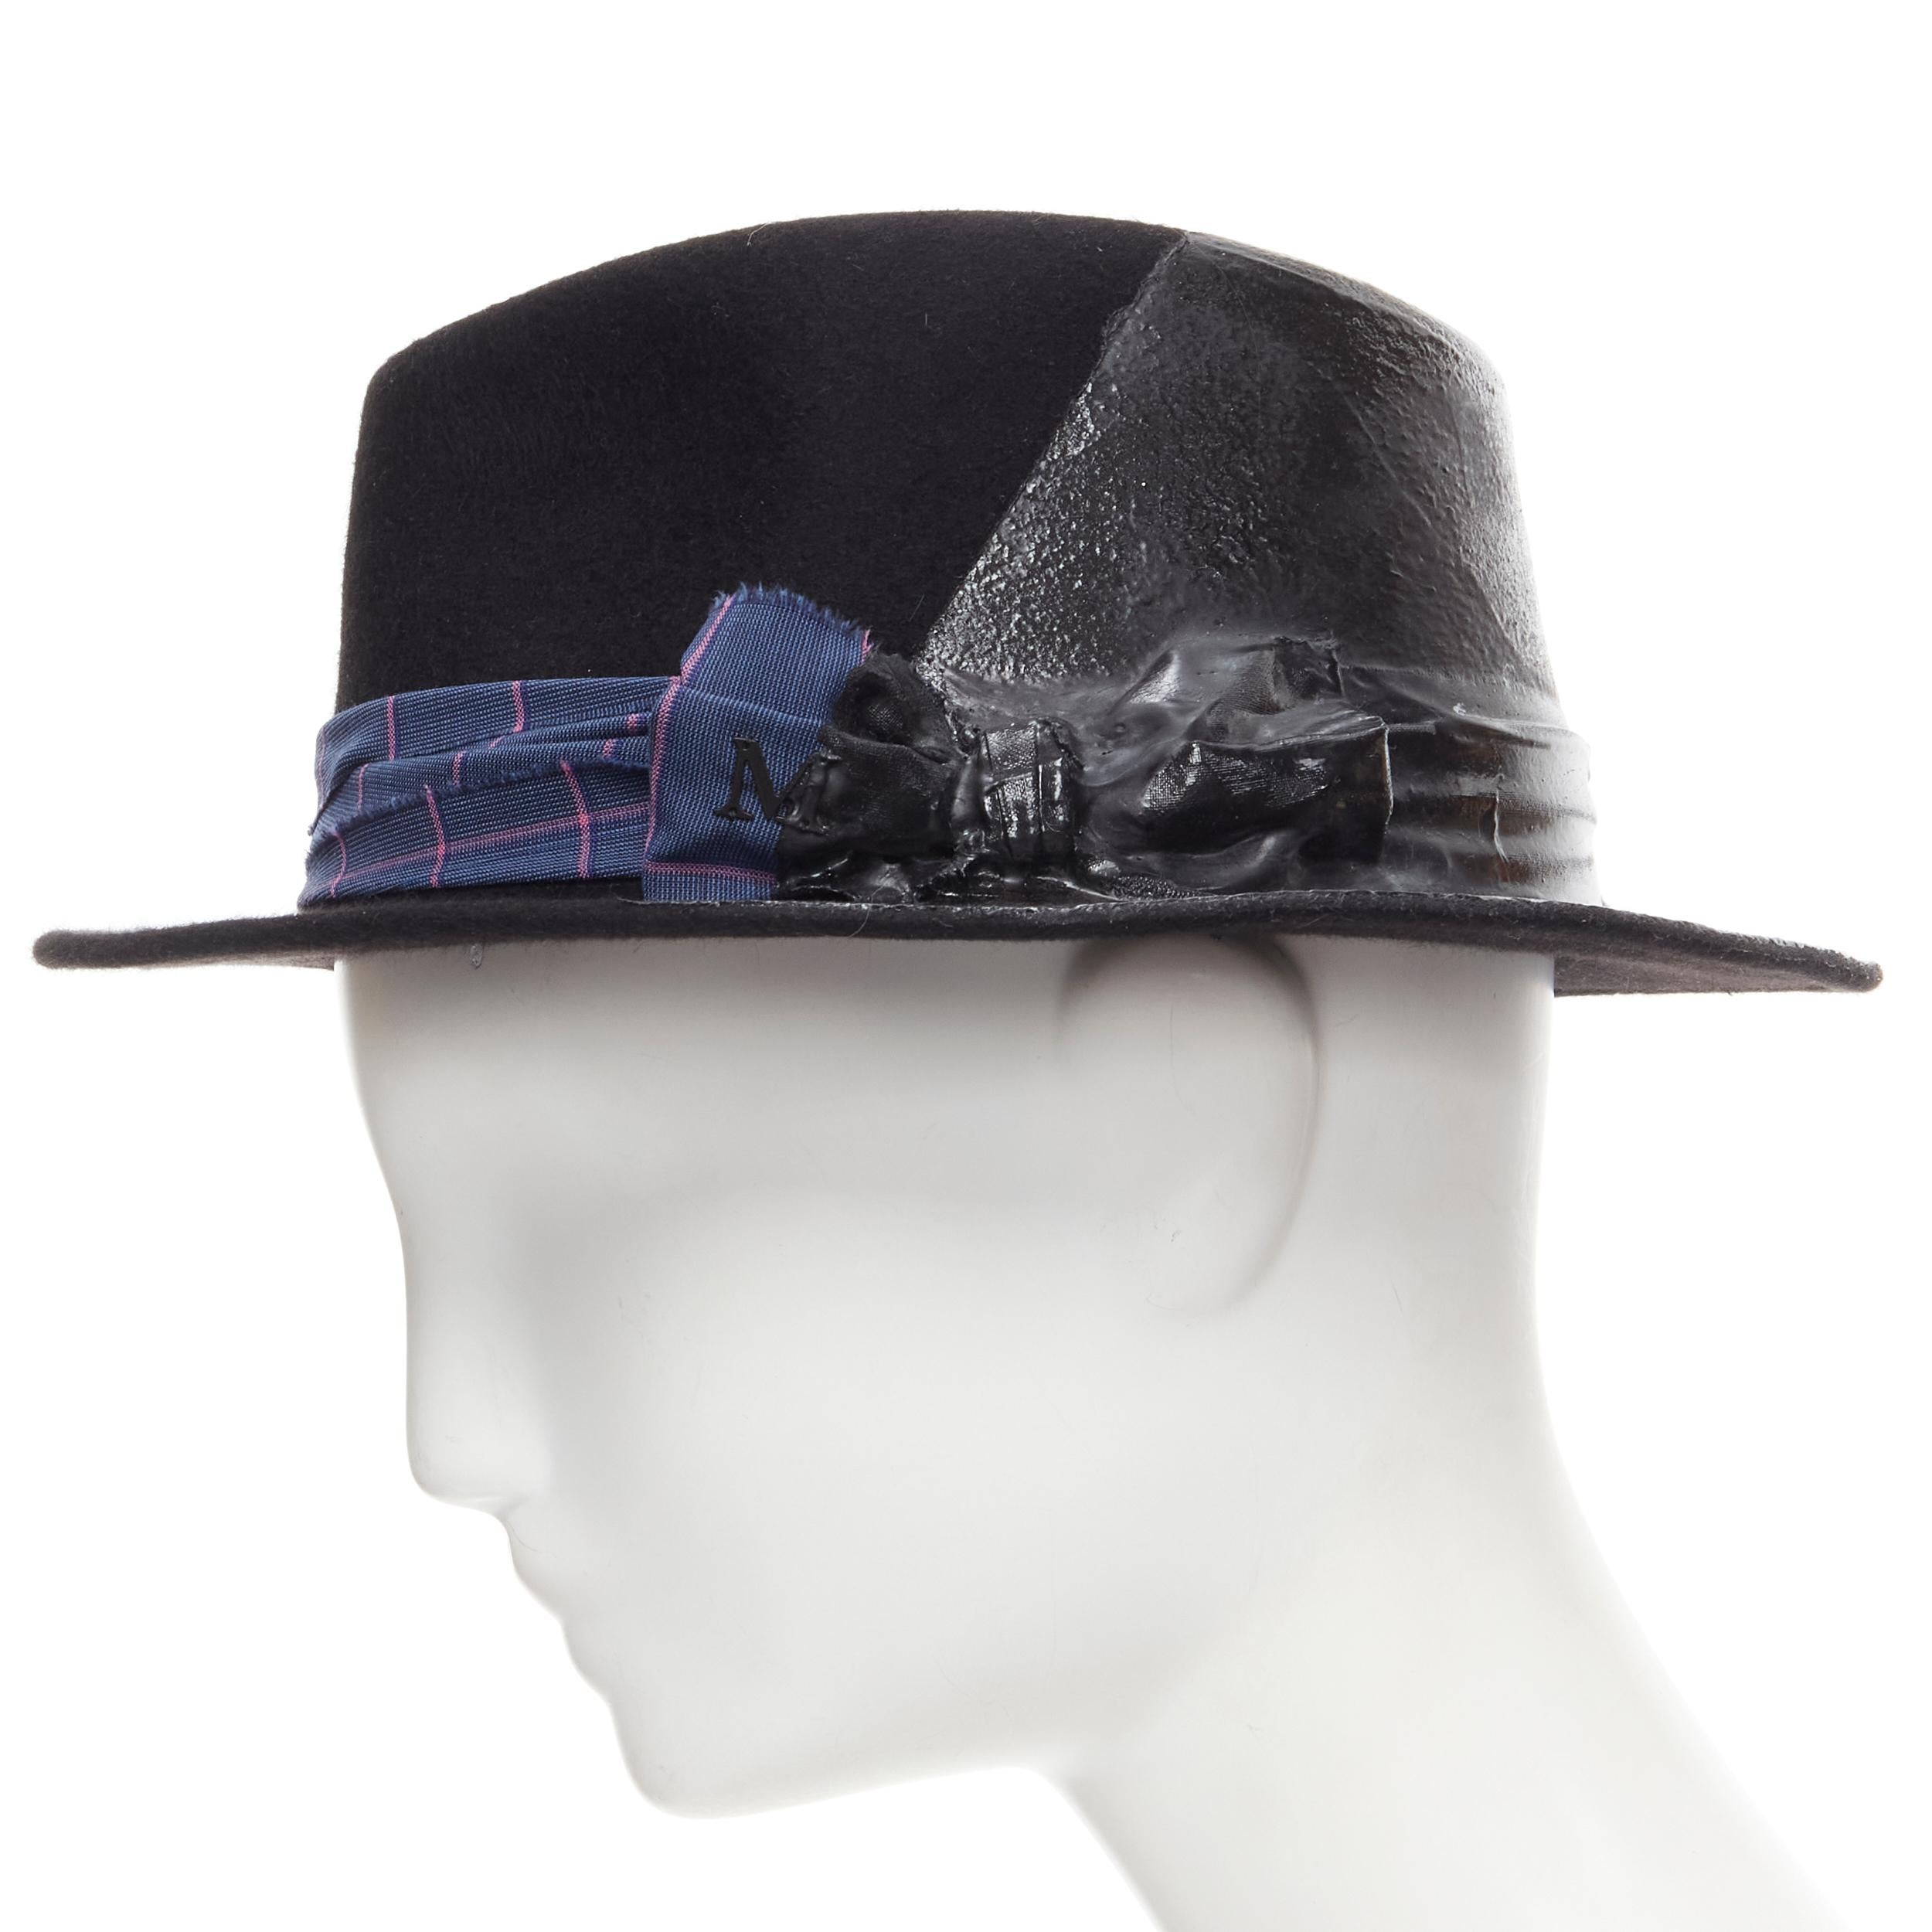 MAISON MICHEL black wool paint lacquered blue check ribbon fedora hat M 57cm 
Reference: MELK/A00159 
Brand: Maison Michel 
Material: Wool 
Color: Black 
Pattern: Solid 
Extra Detail: Fedora hat. Frayed blue purple check wrap ribbon tie bow. Black